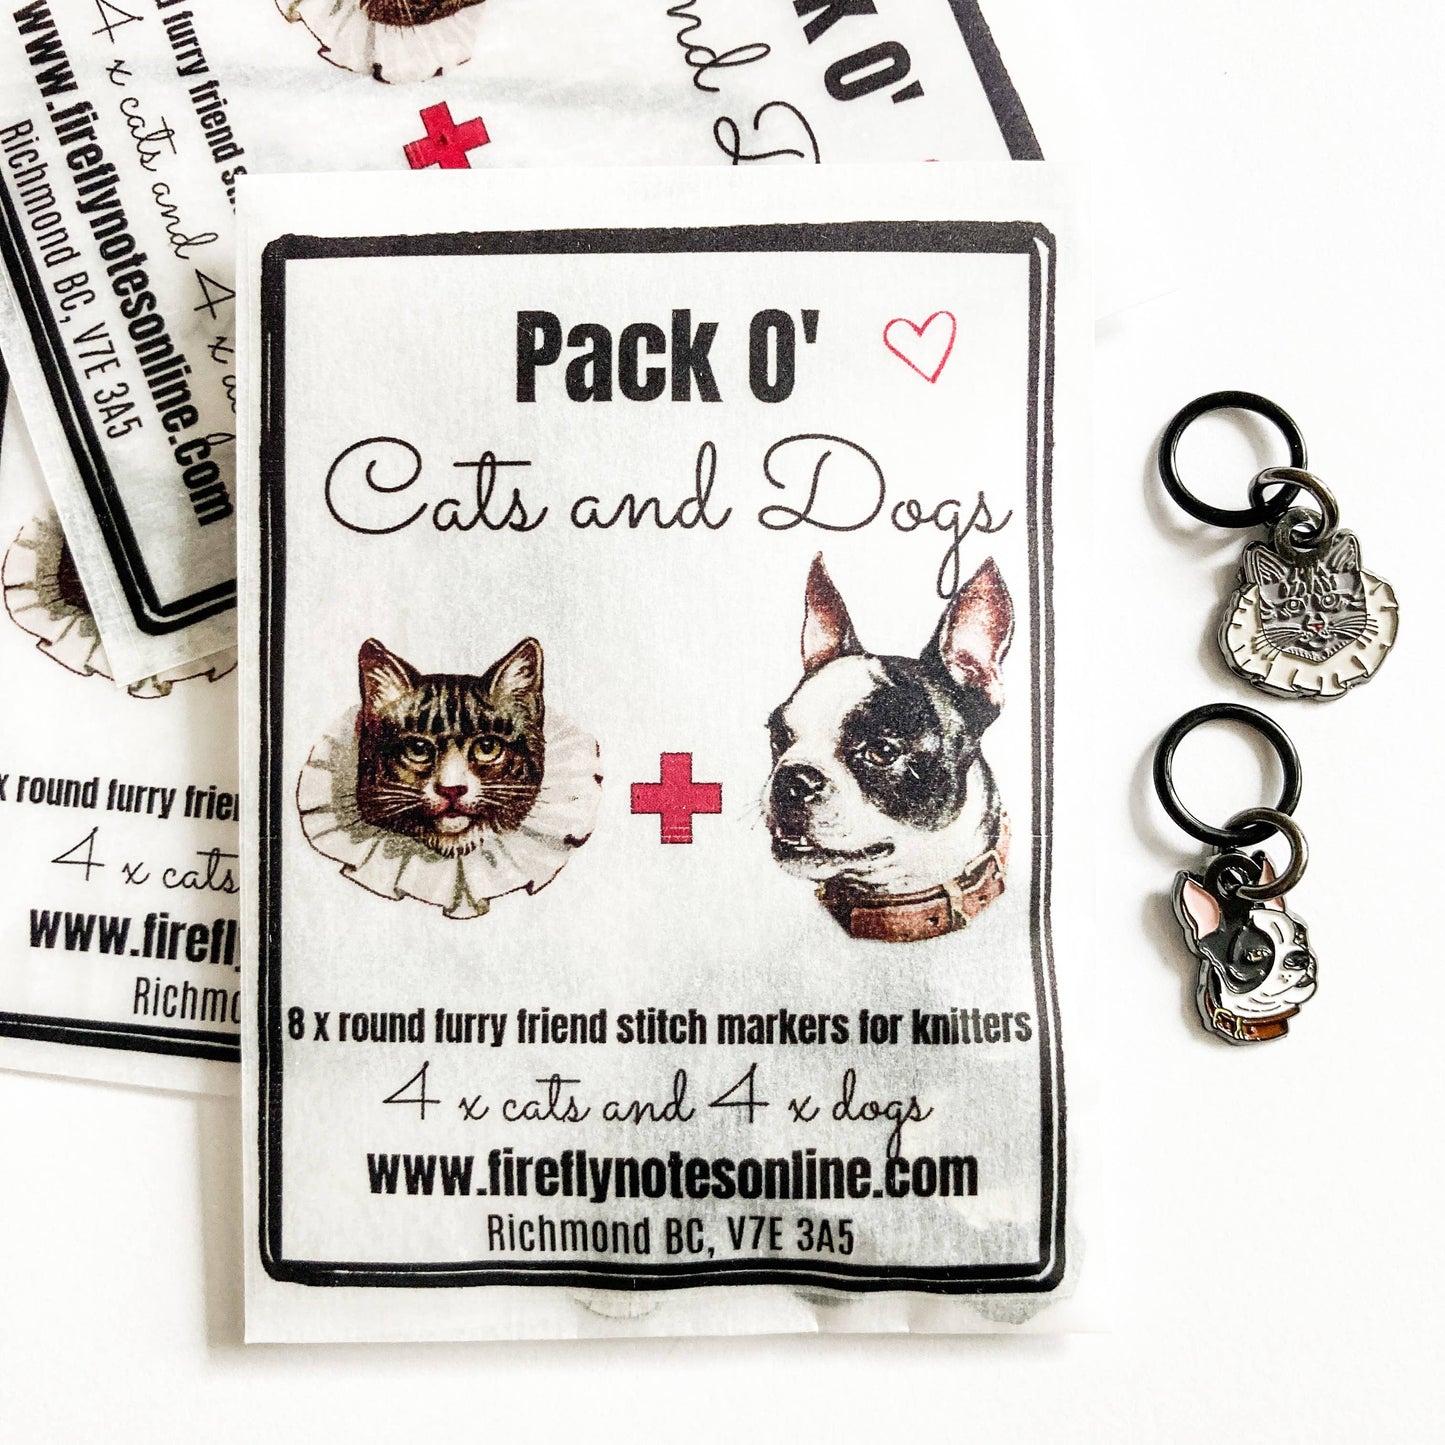 Dogs and Cats Stitch Marker Pack